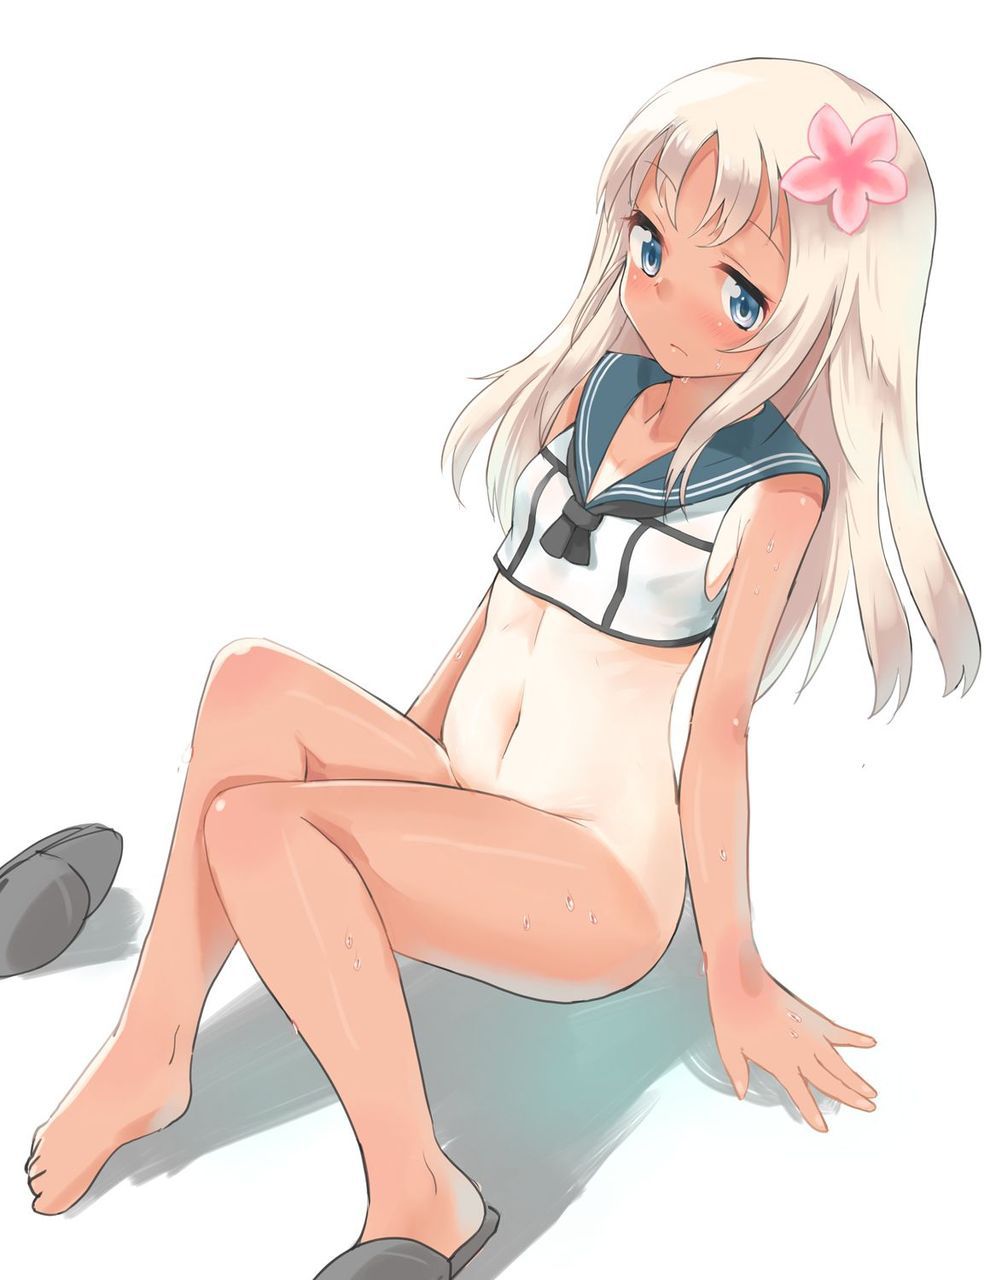 【Tanned Lori Girl】Secondary erotic image of Lori girl that shows the boundary between tanned and unburned skin even though it is out of season 26